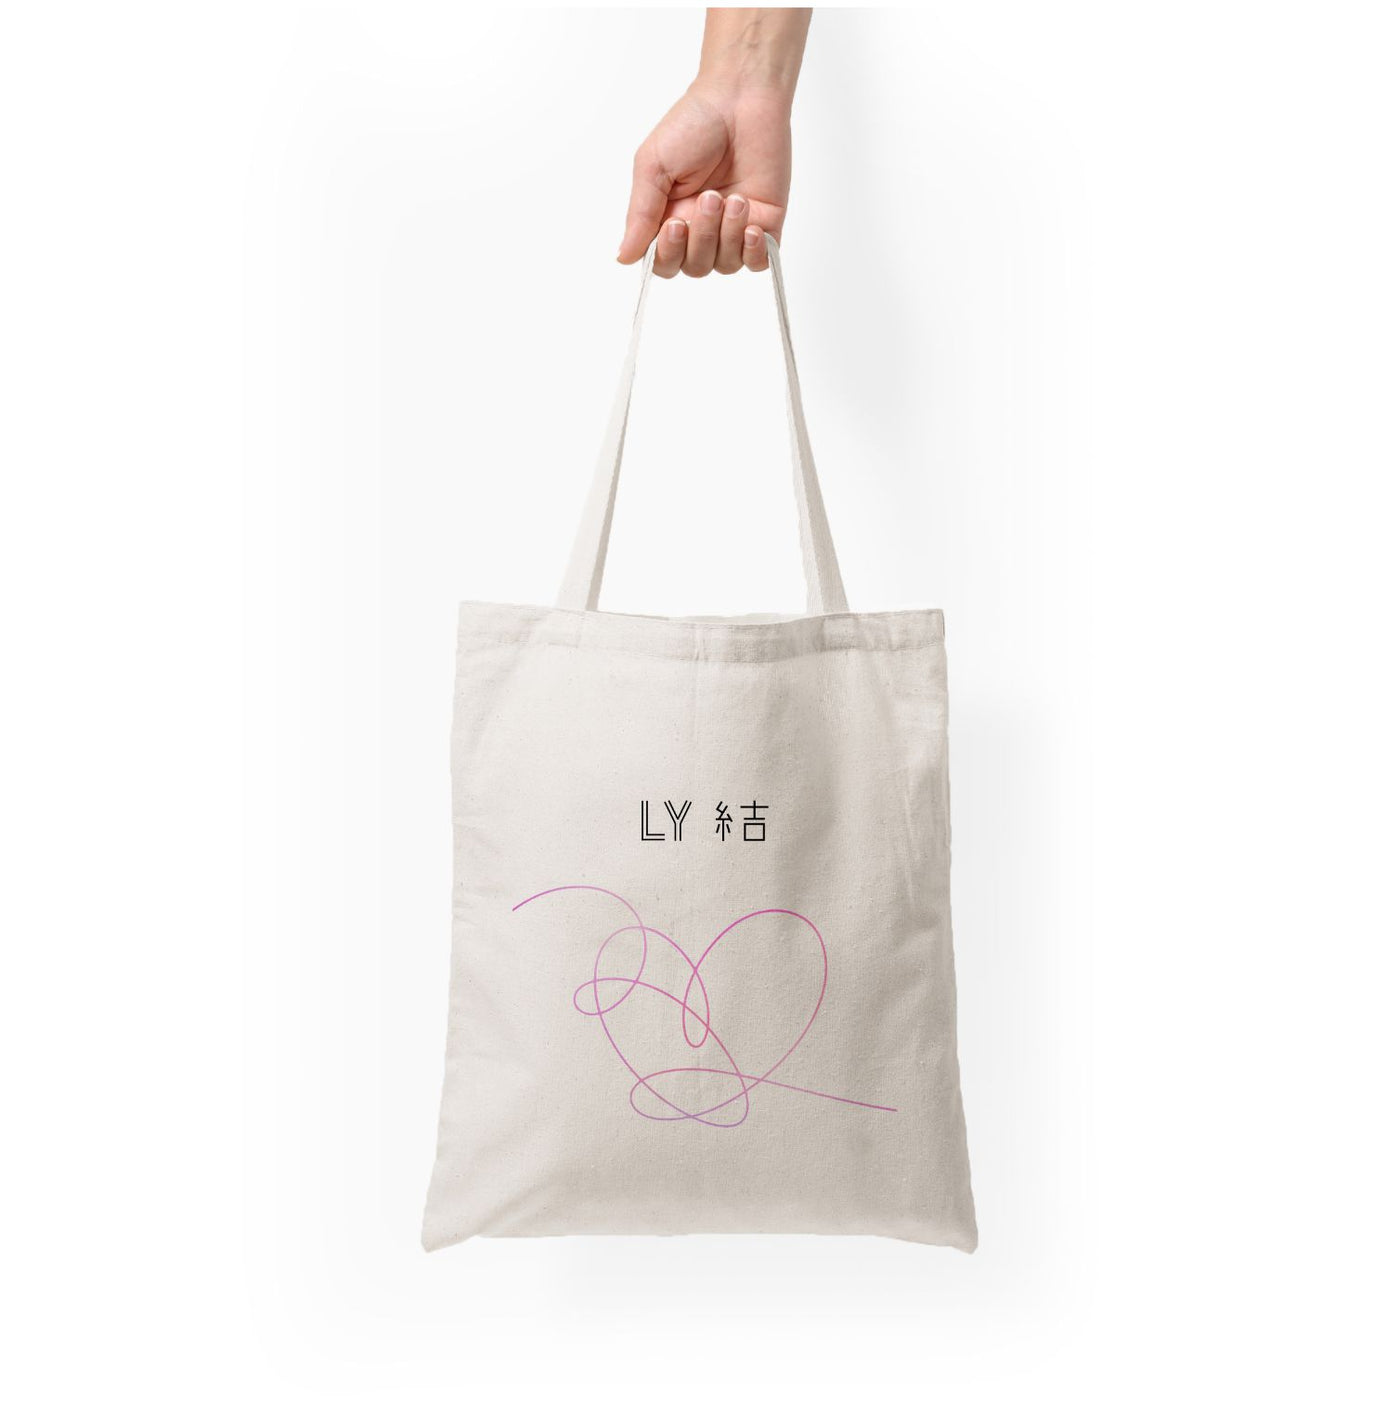 LY Heart - BTS  Tote Bag